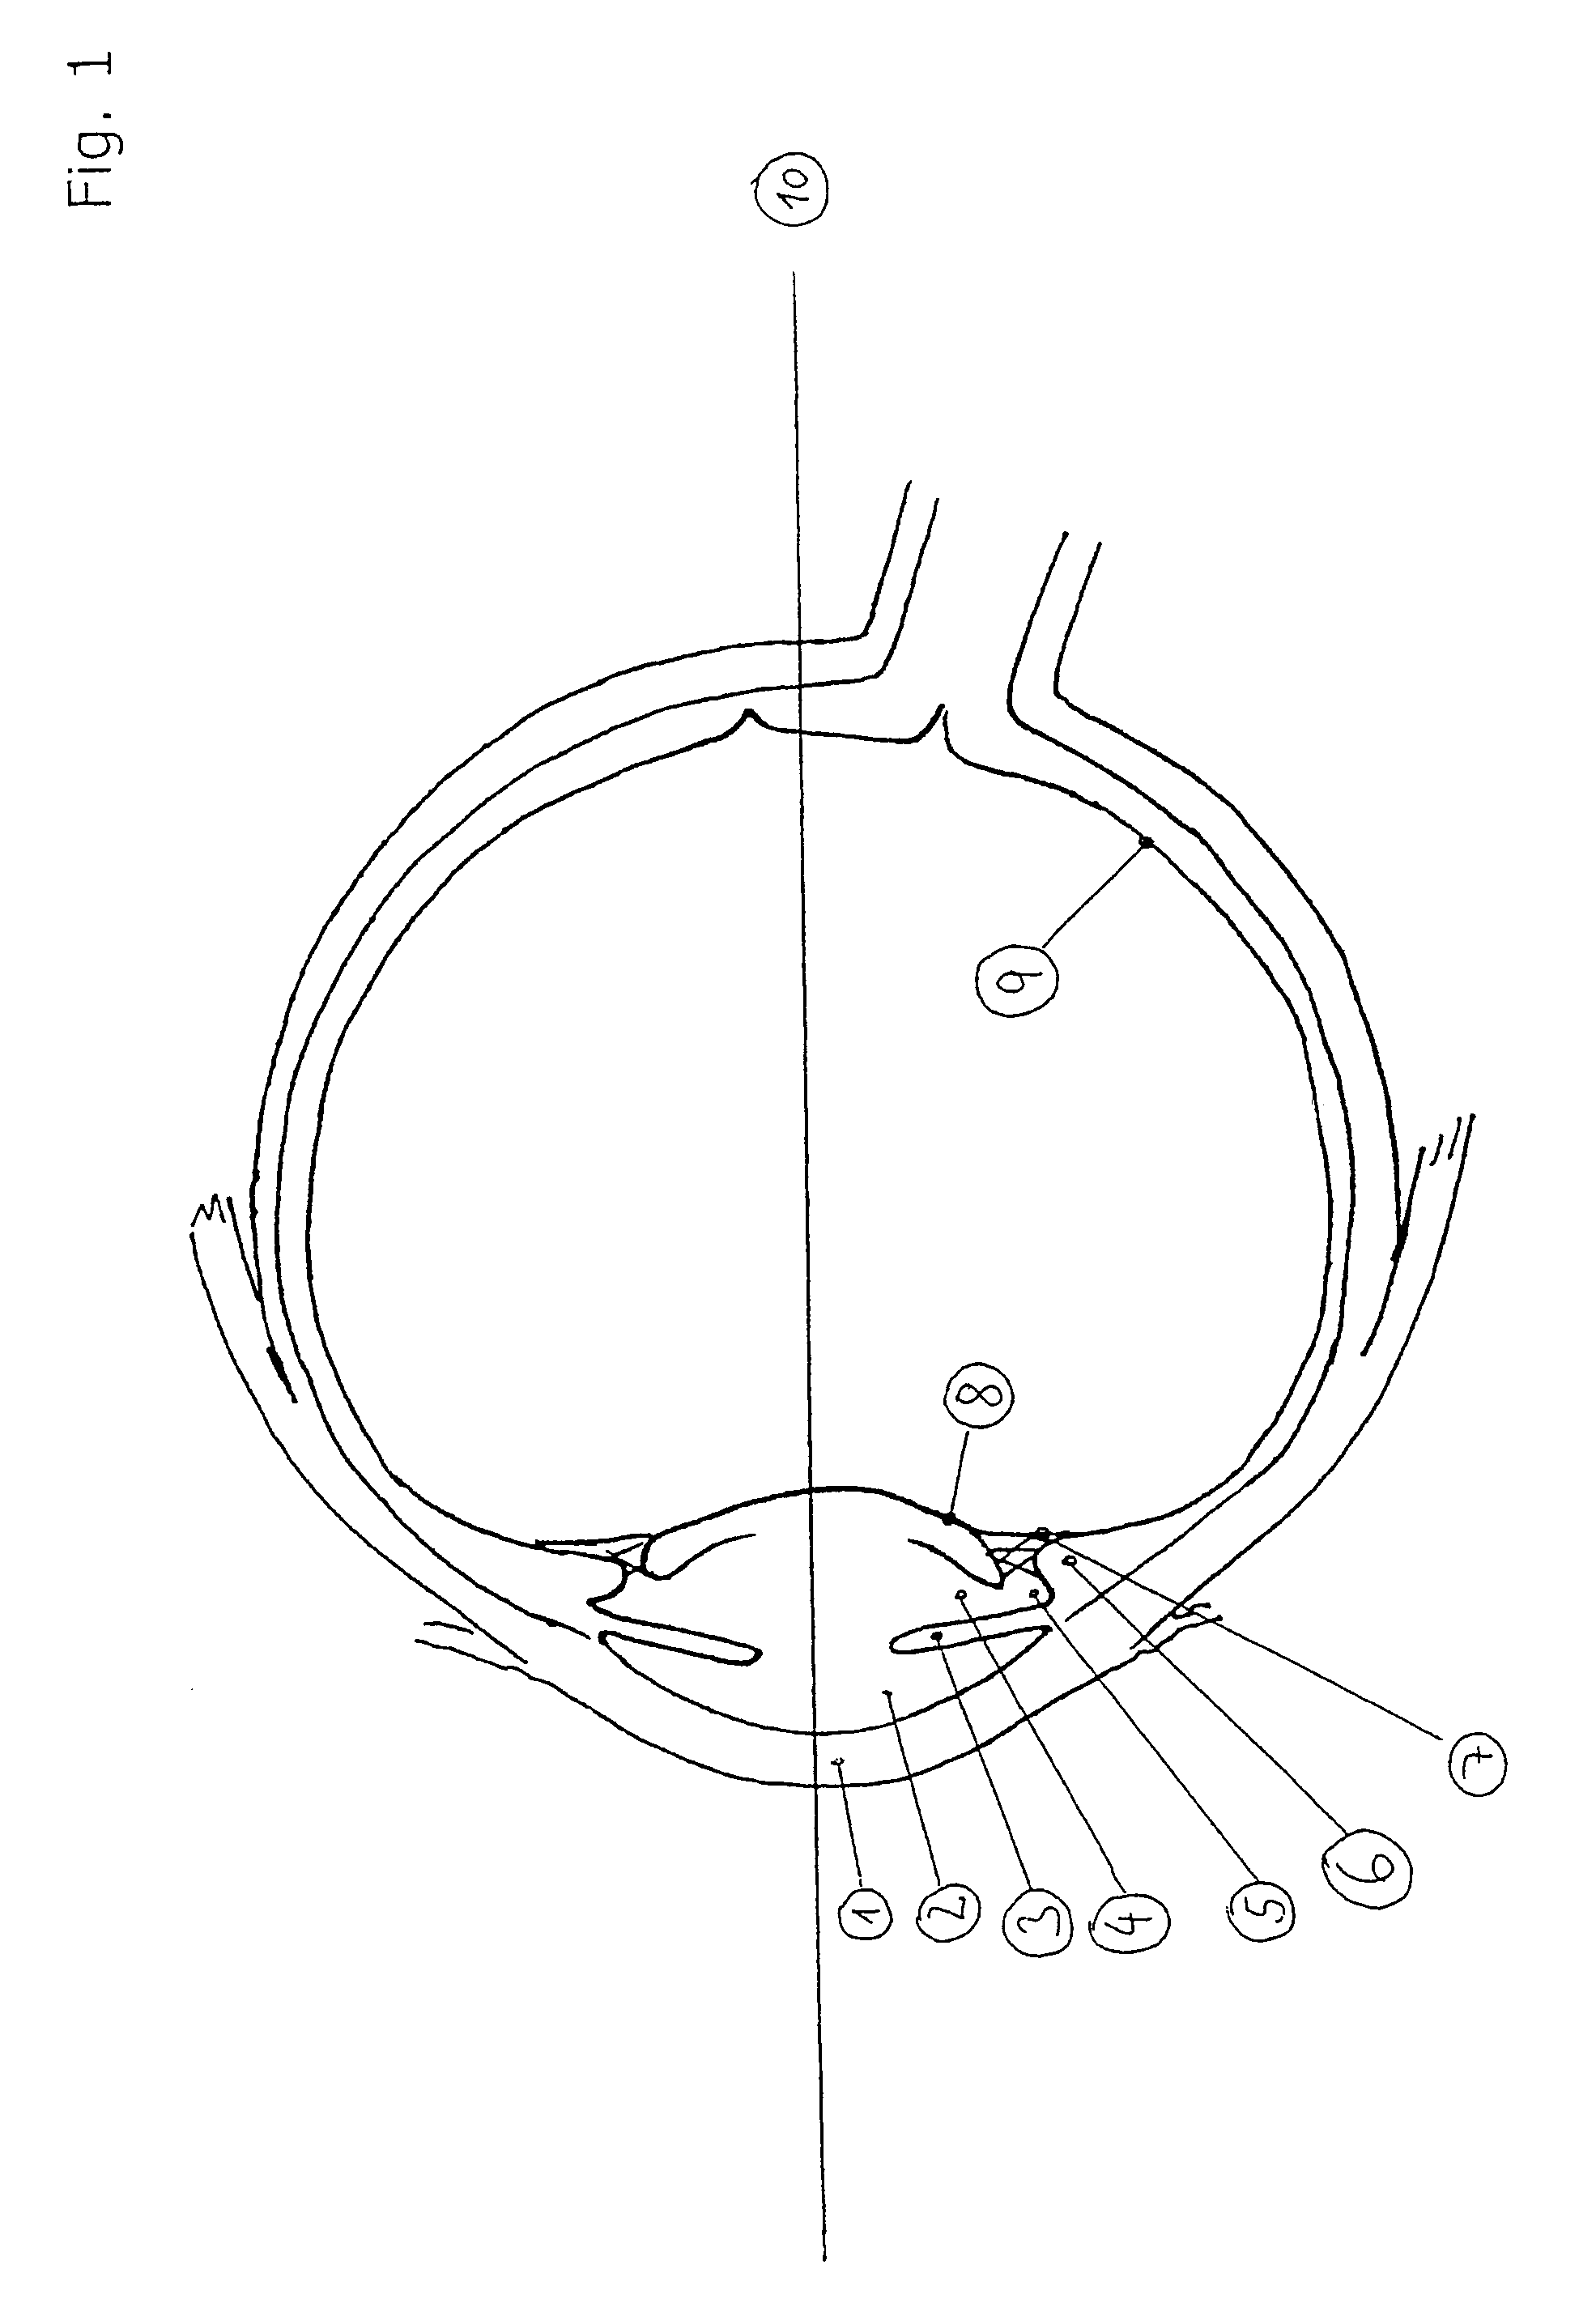 Accommodative lens implant, controlled by the ciliary muscle